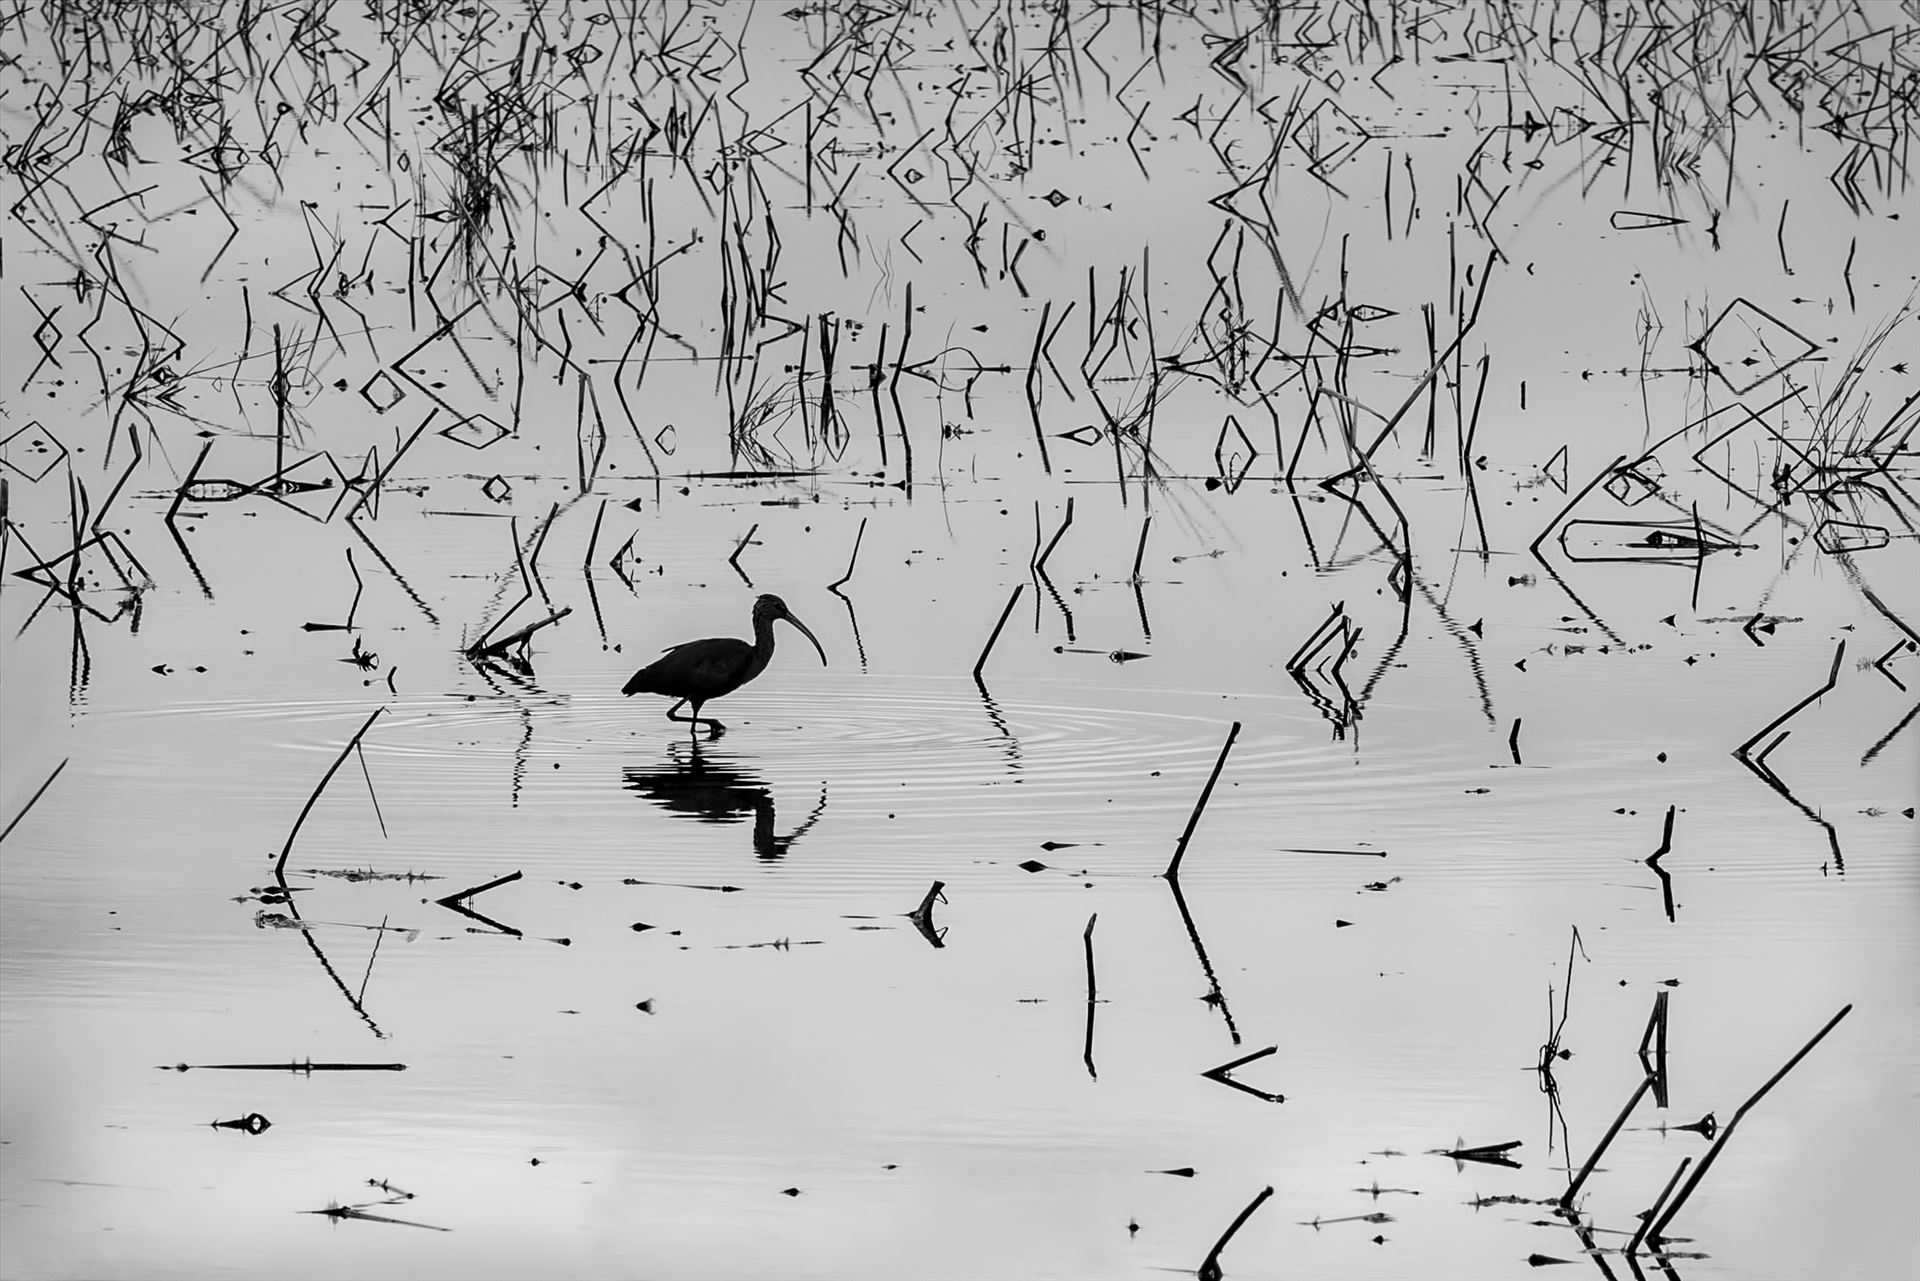 Watching and Waiting - A bird hunts in the shallow waters at the Yolo Bypass by Denise Buckley Crawford